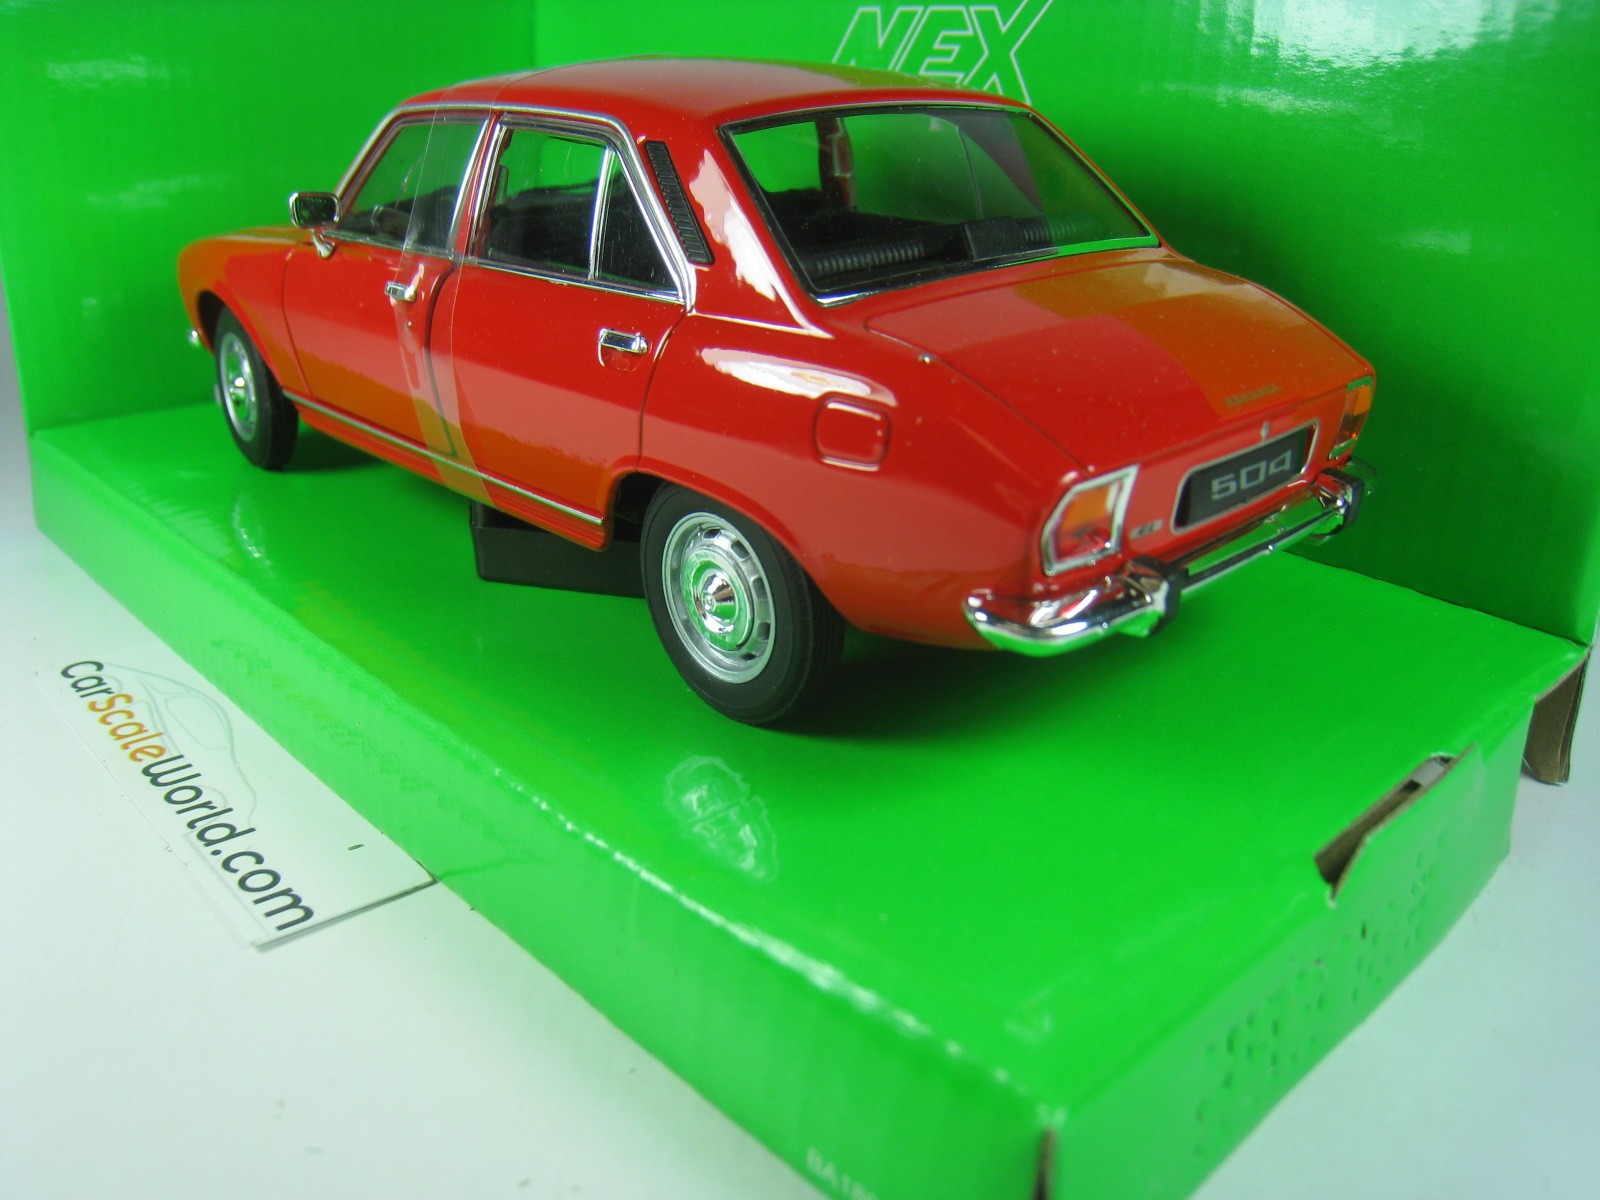 Peugeot 504 1975 - 1/24 Welly Voiture miniature Diecast 24001W